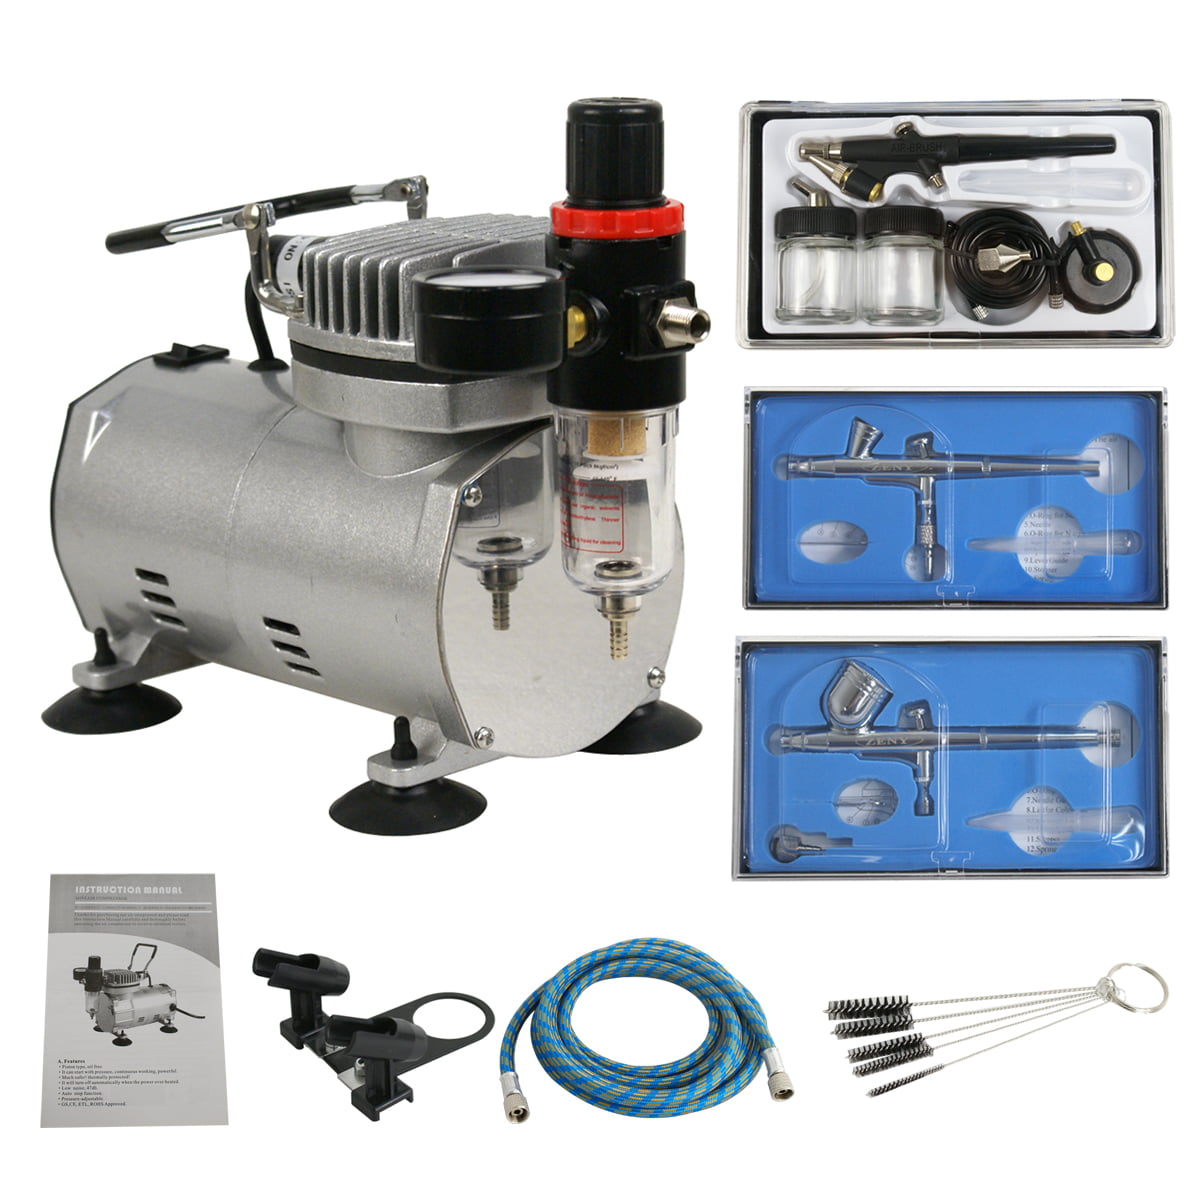 ZENY Pro Multi-purpose Airbrush 1/5HP Airbrushing Compressor Kit System Dual Action Paint Artist Set w/ 3 Airbrushes 6 Air Hose & Airbrush Holder 